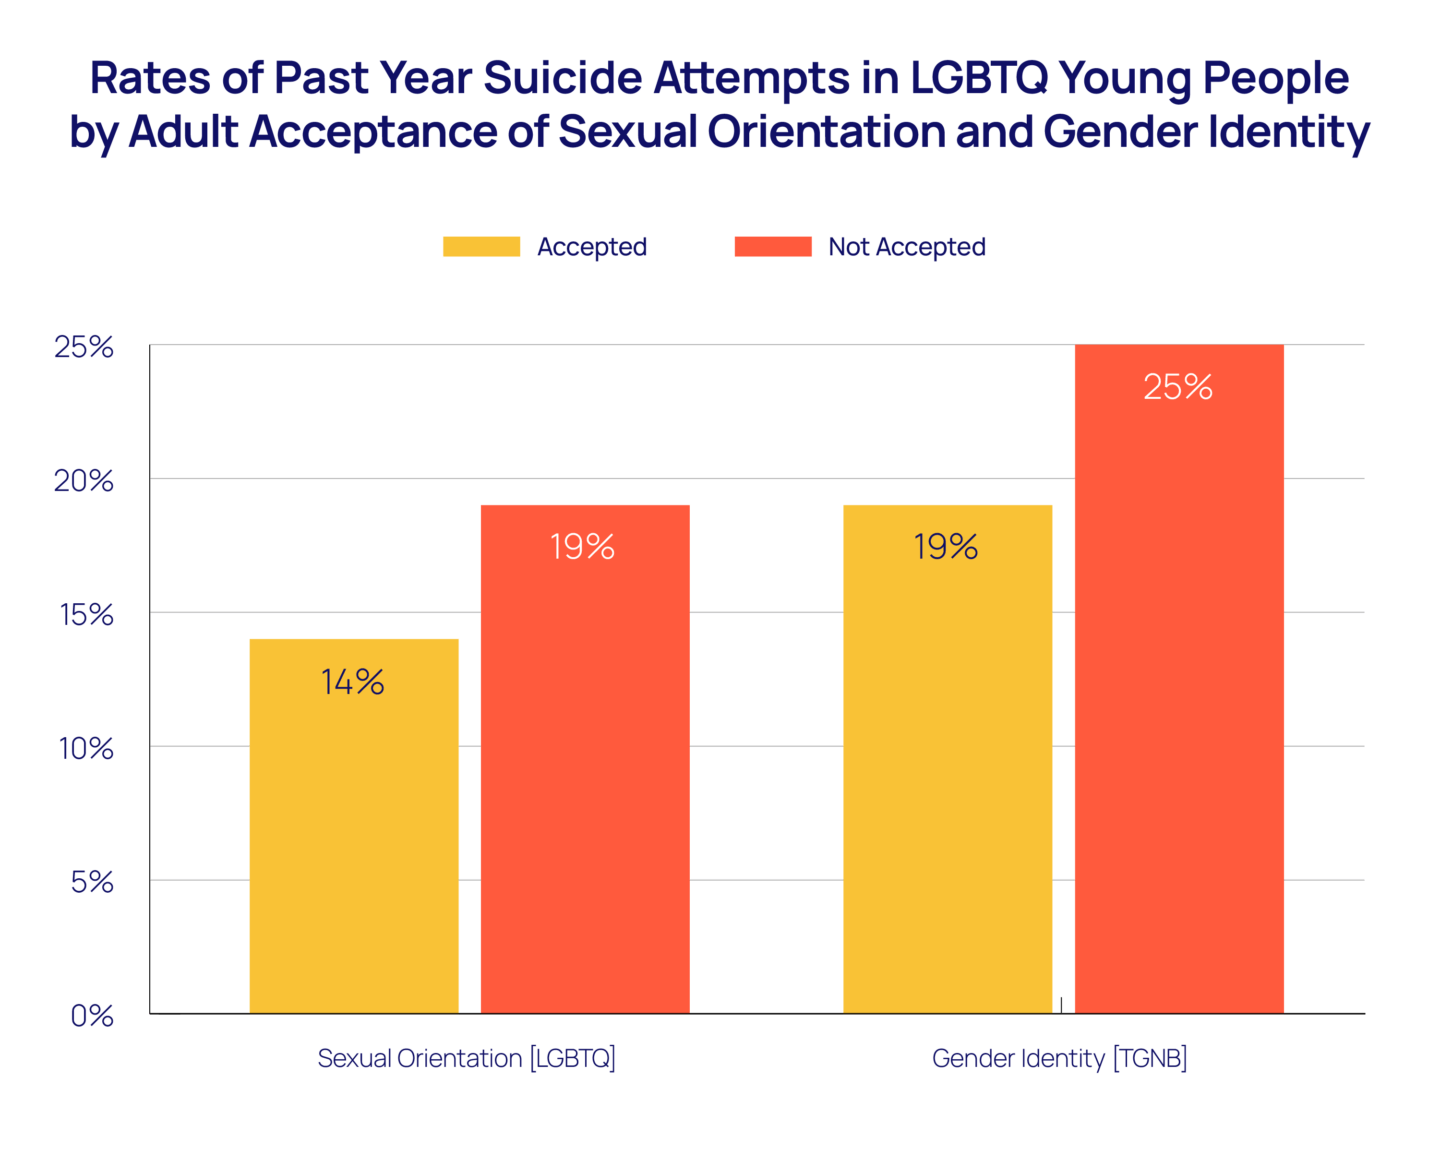 Rates of Past Year Suicide Attempts in LGBTQ Young People by Adult Acceptance of Sexual Orientation and Gender Identity bar chart